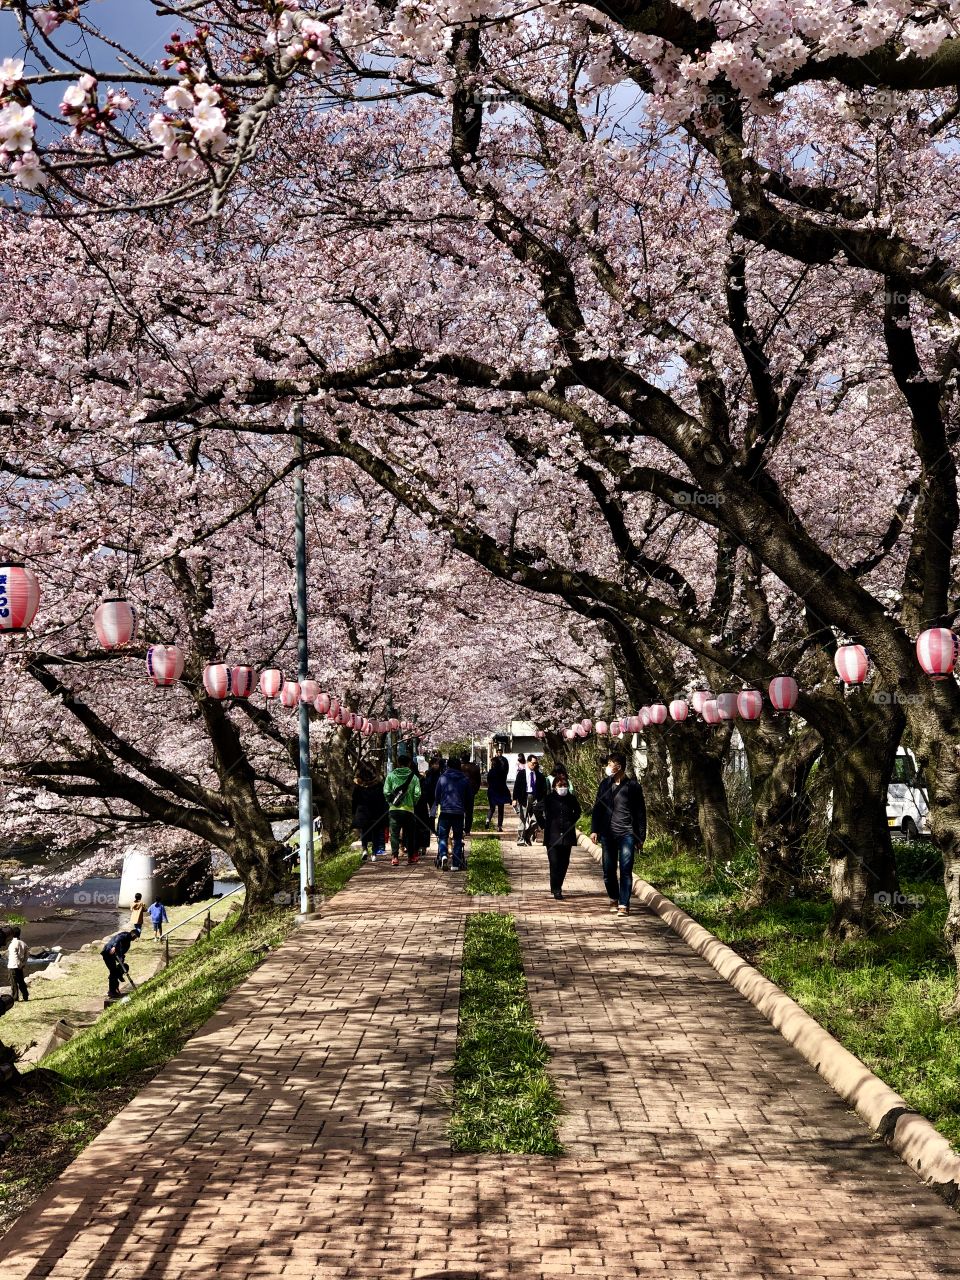 The beauty of a Japanese spring afternoon.